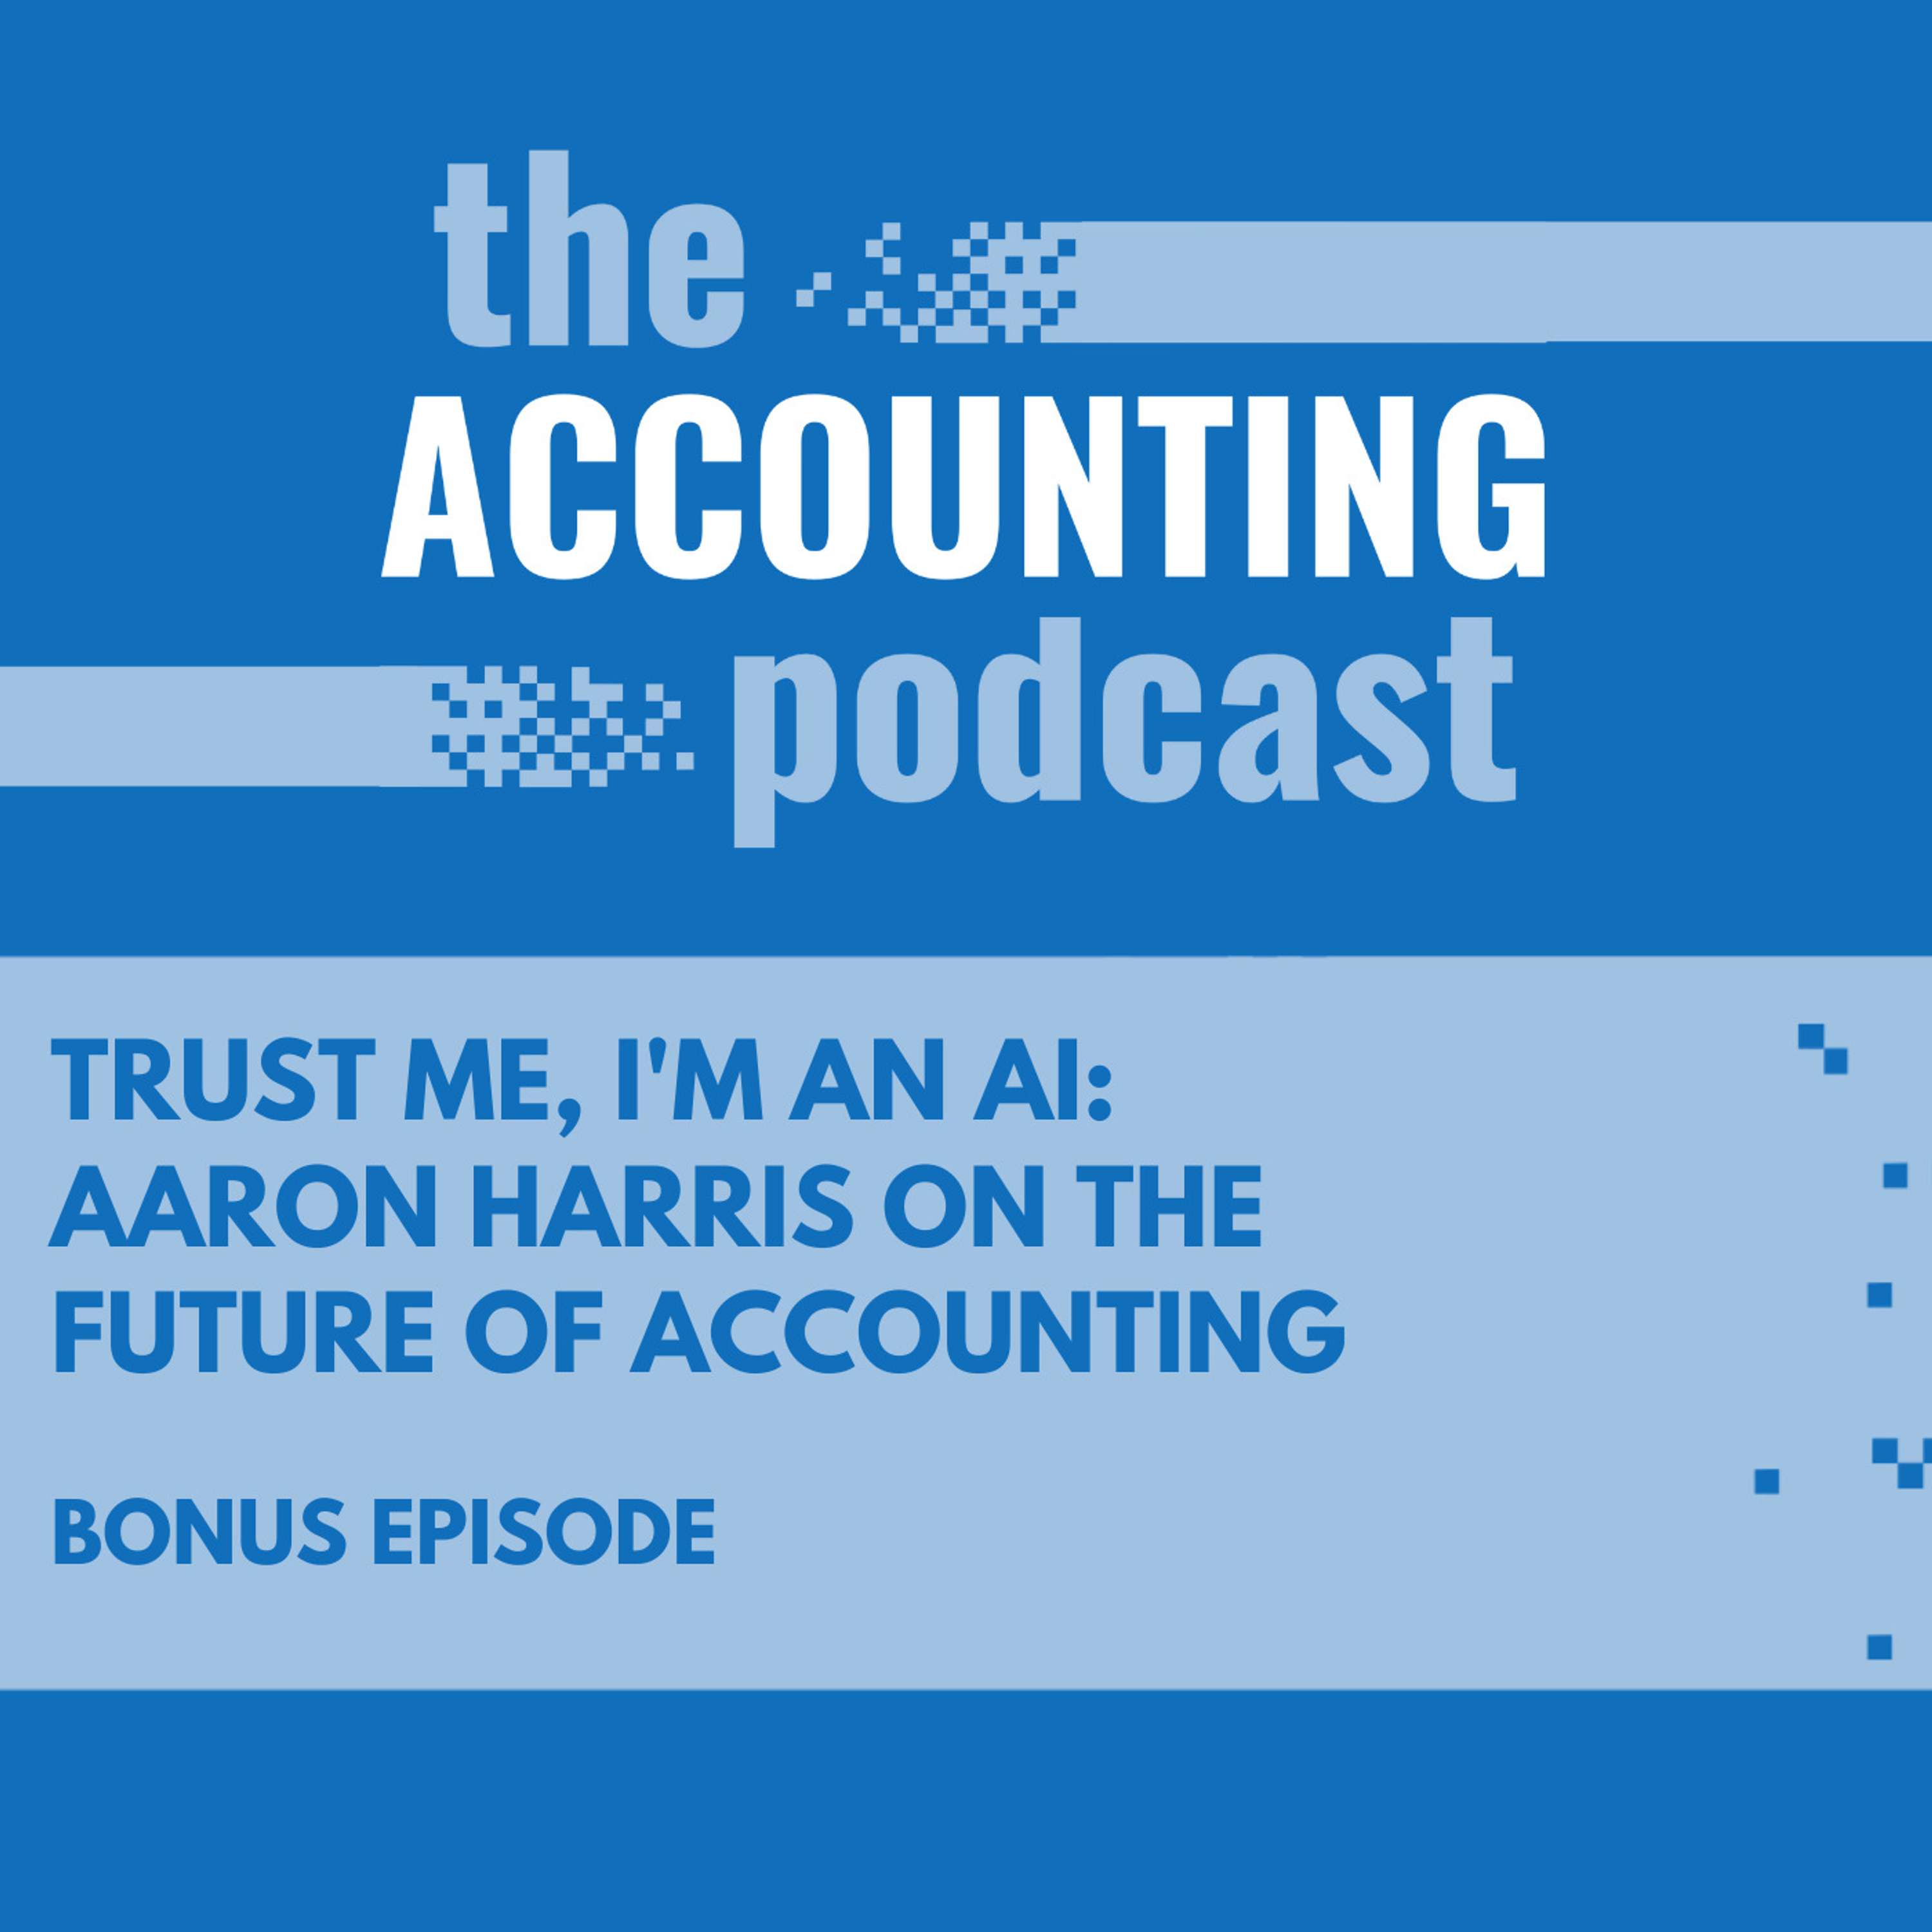 Trust Me, I'm an AI: Aaron Harris on the Future of Accounting